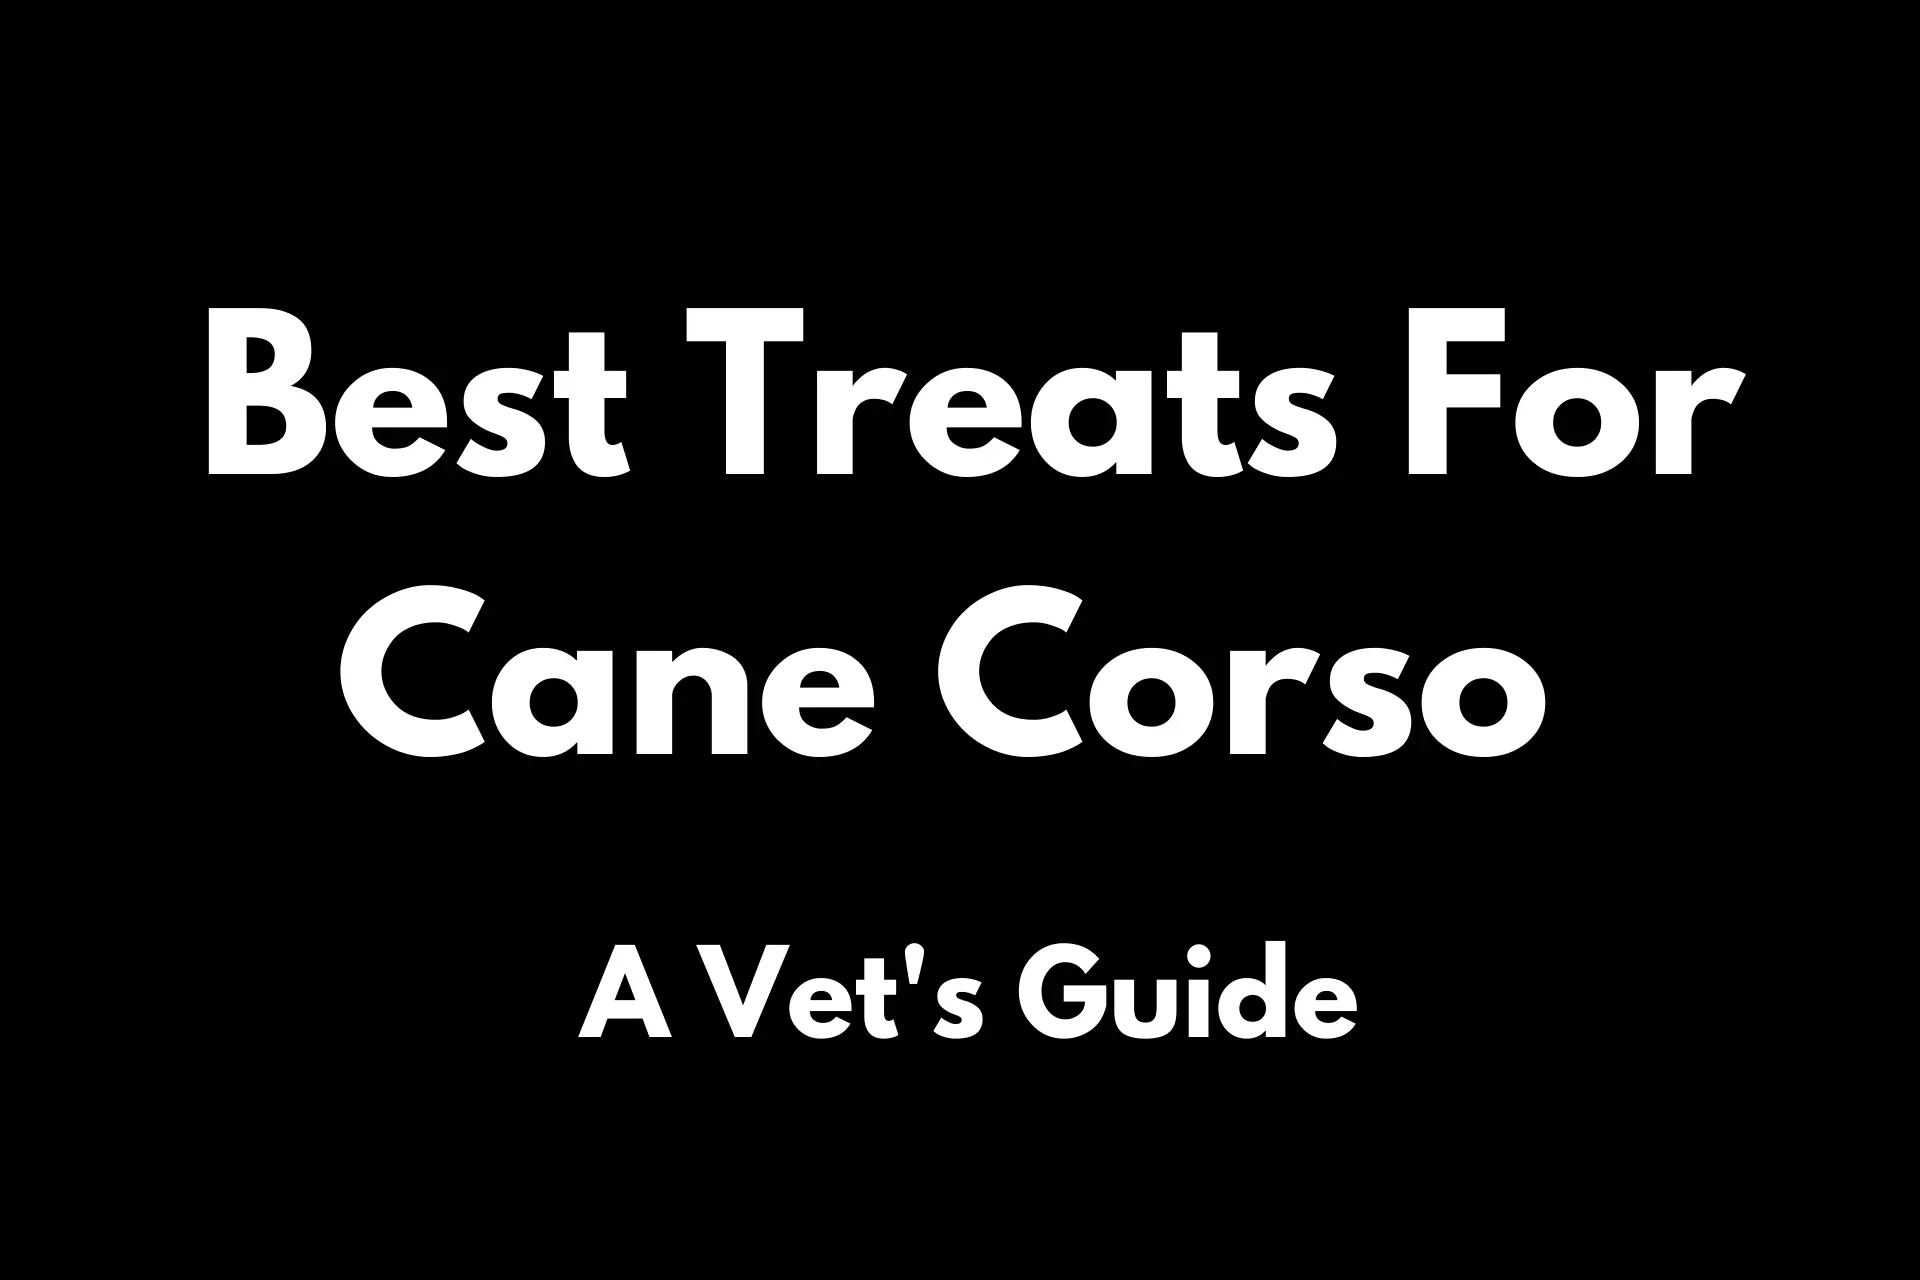 best treats for cane corso